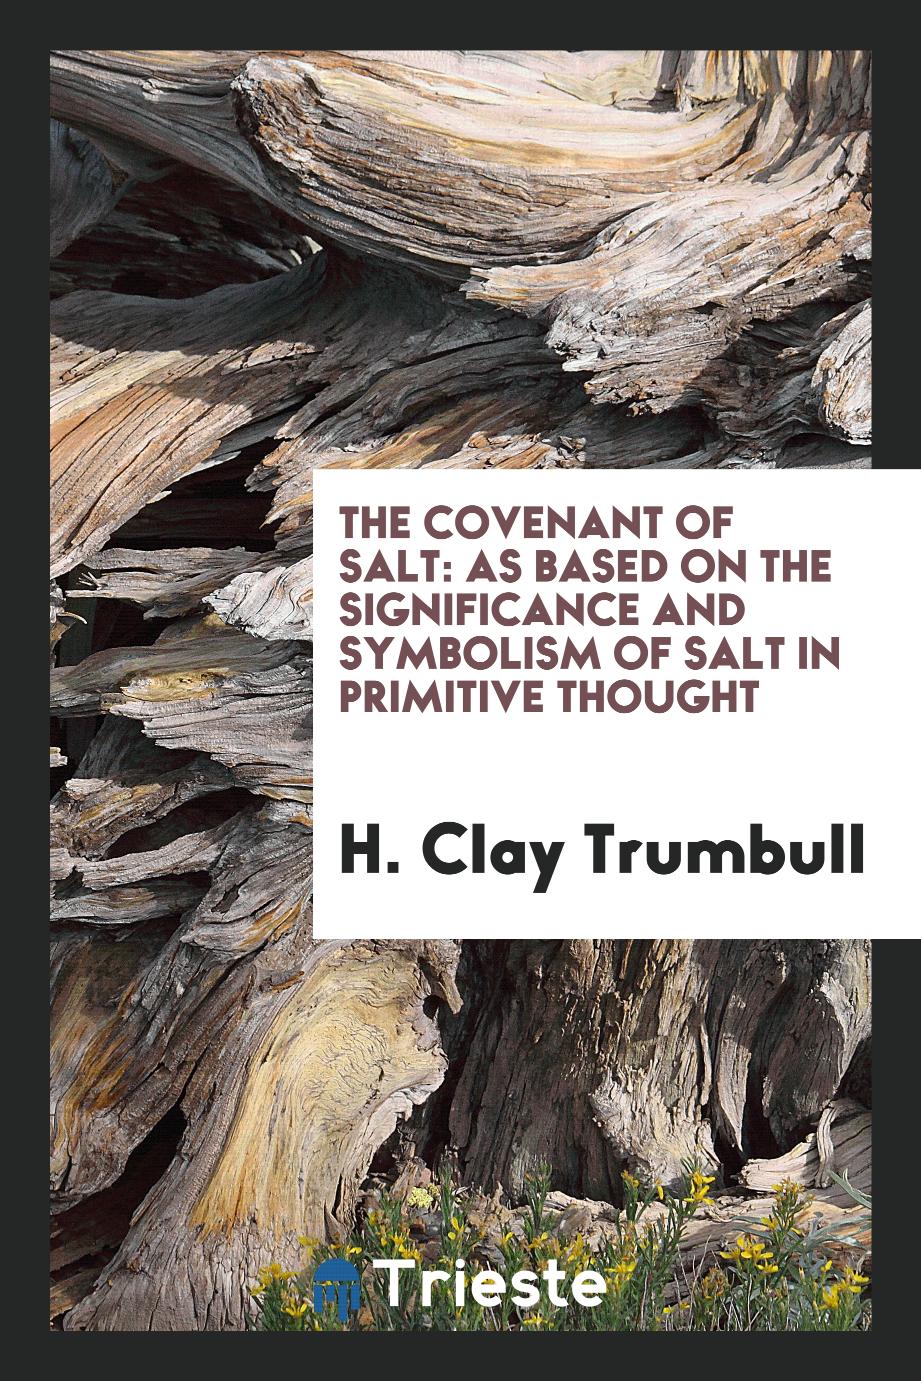 The covenant of salt: as based on the significance and symbolism of salt in primitive thought